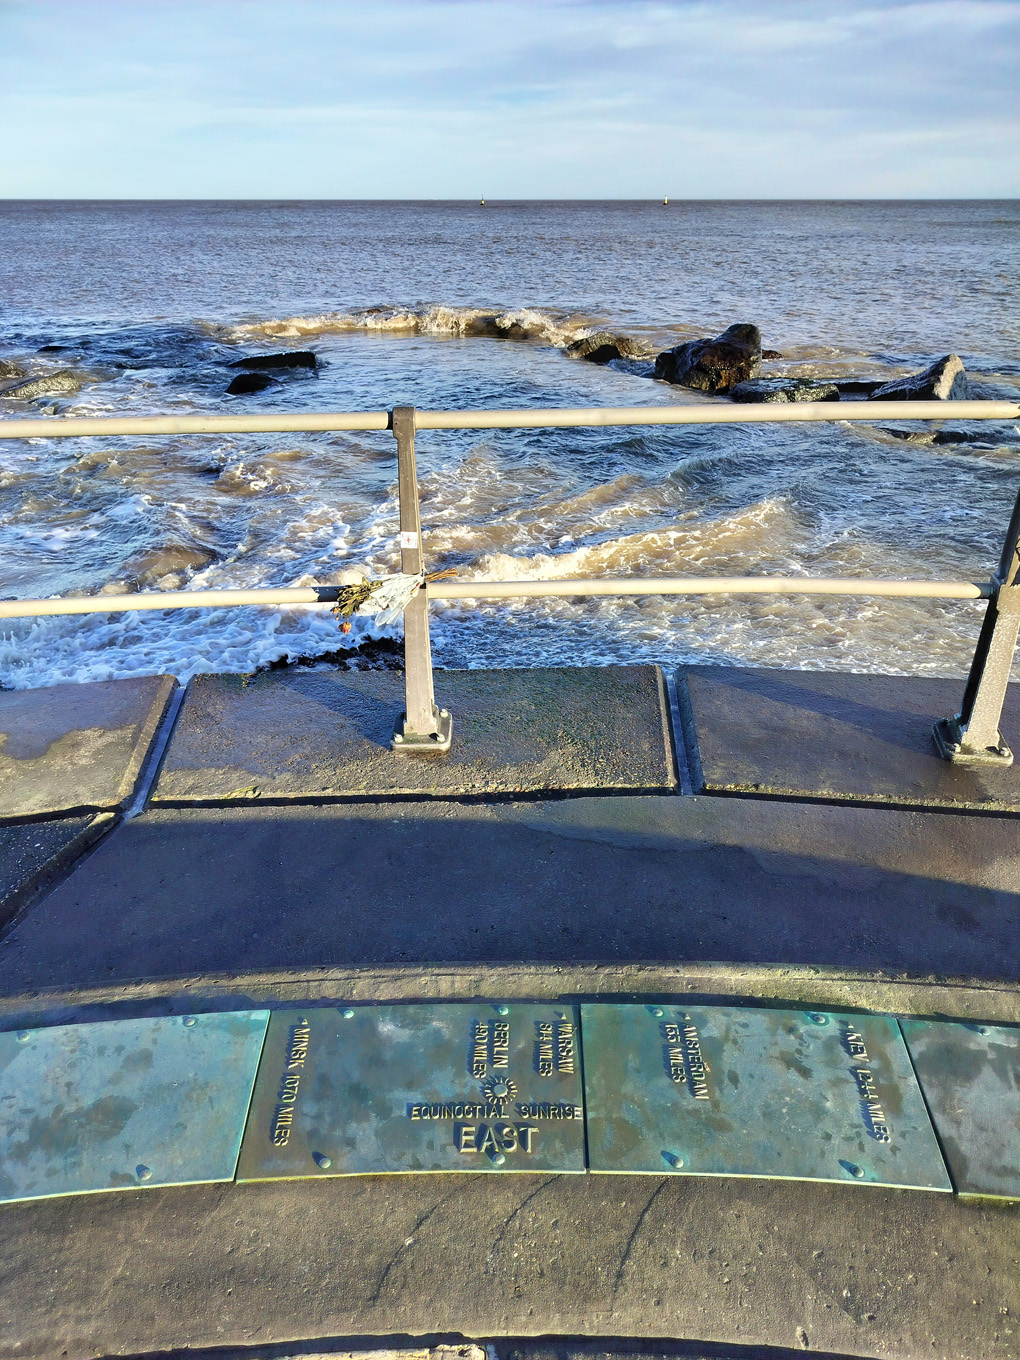 A view of the sea. On the floor a plaque and arrow pointing towards equatorial east.